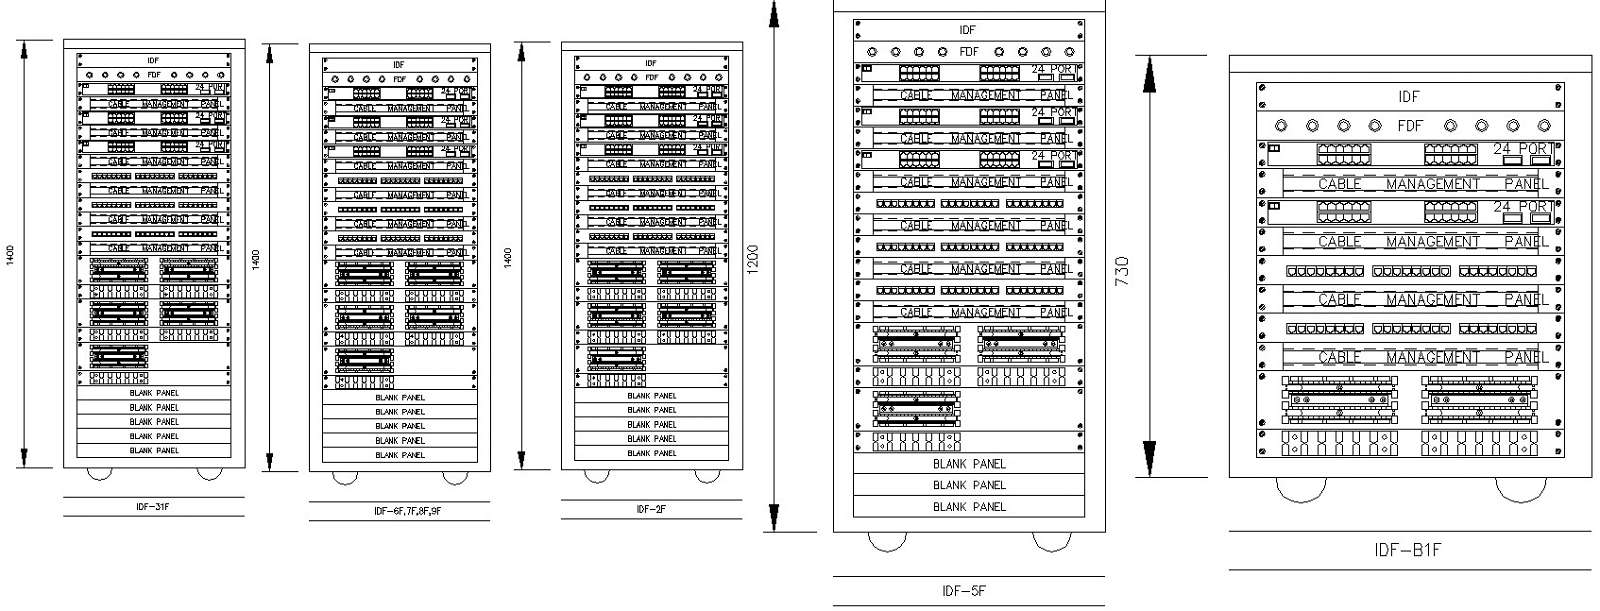 Autocad DWG file showing the details of the IDF rack detailed diagram